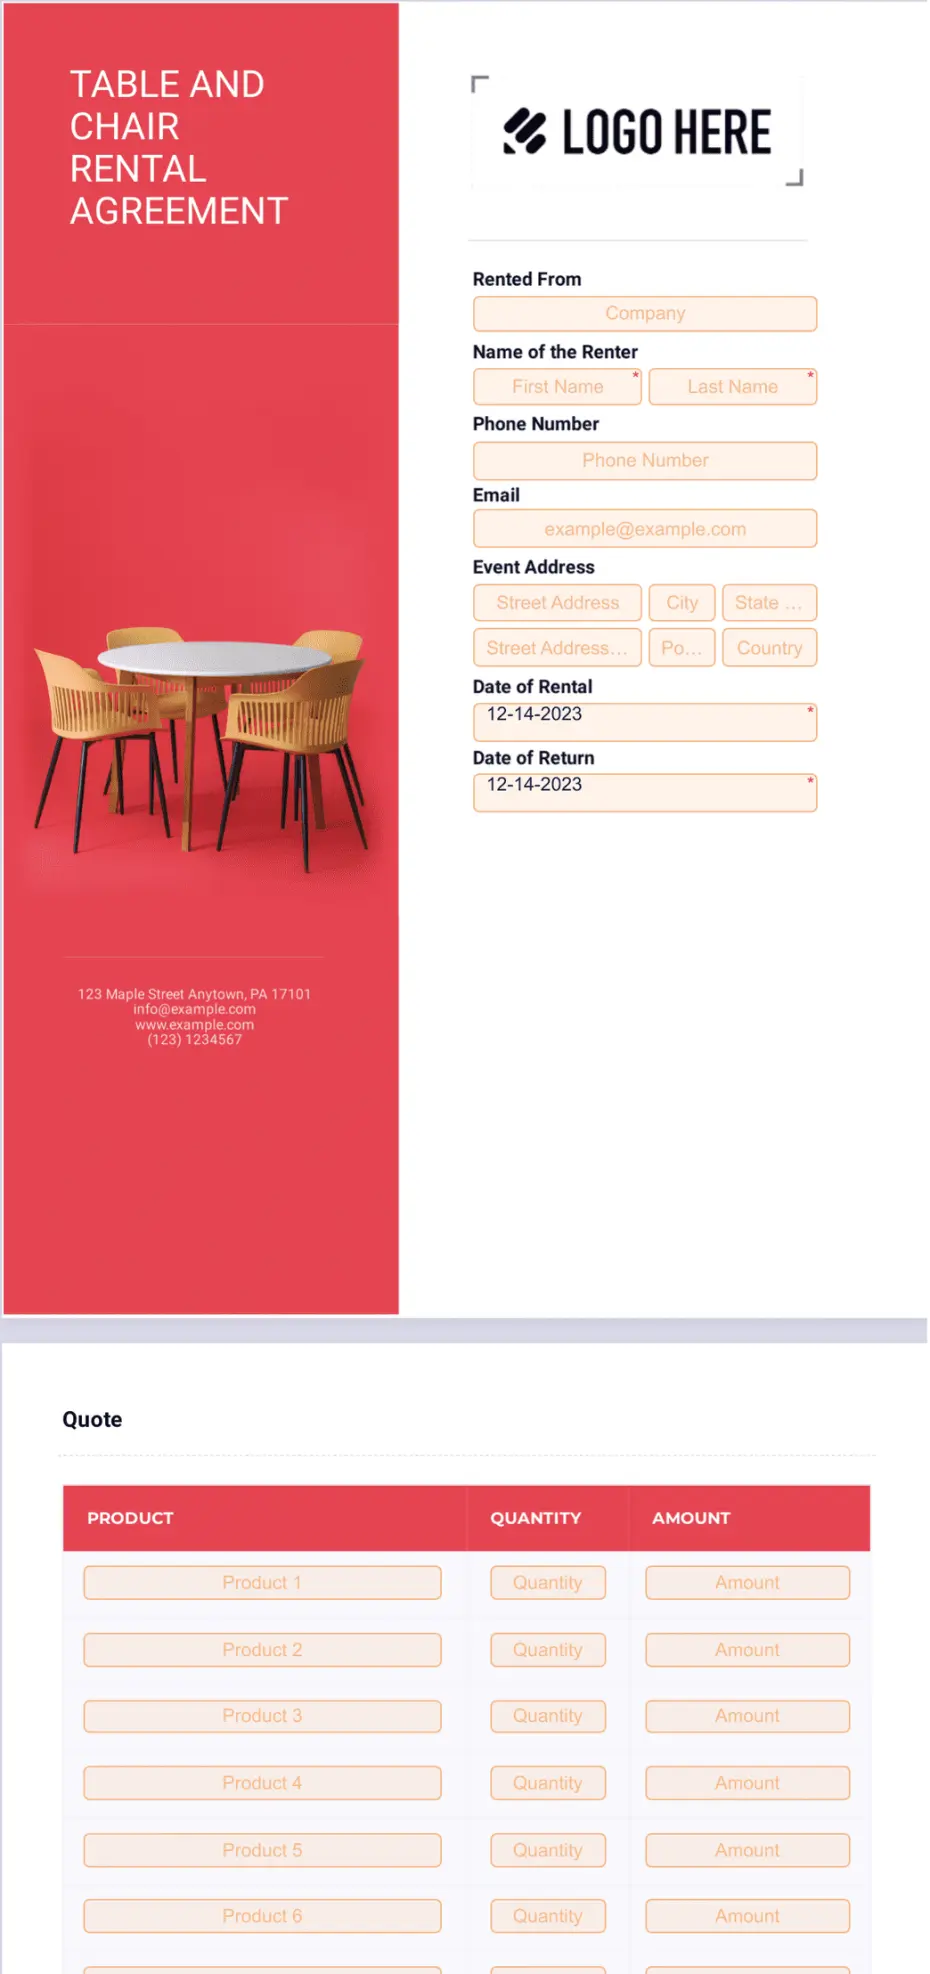 Table and Chair Rental Agreement Form - Sign Templates